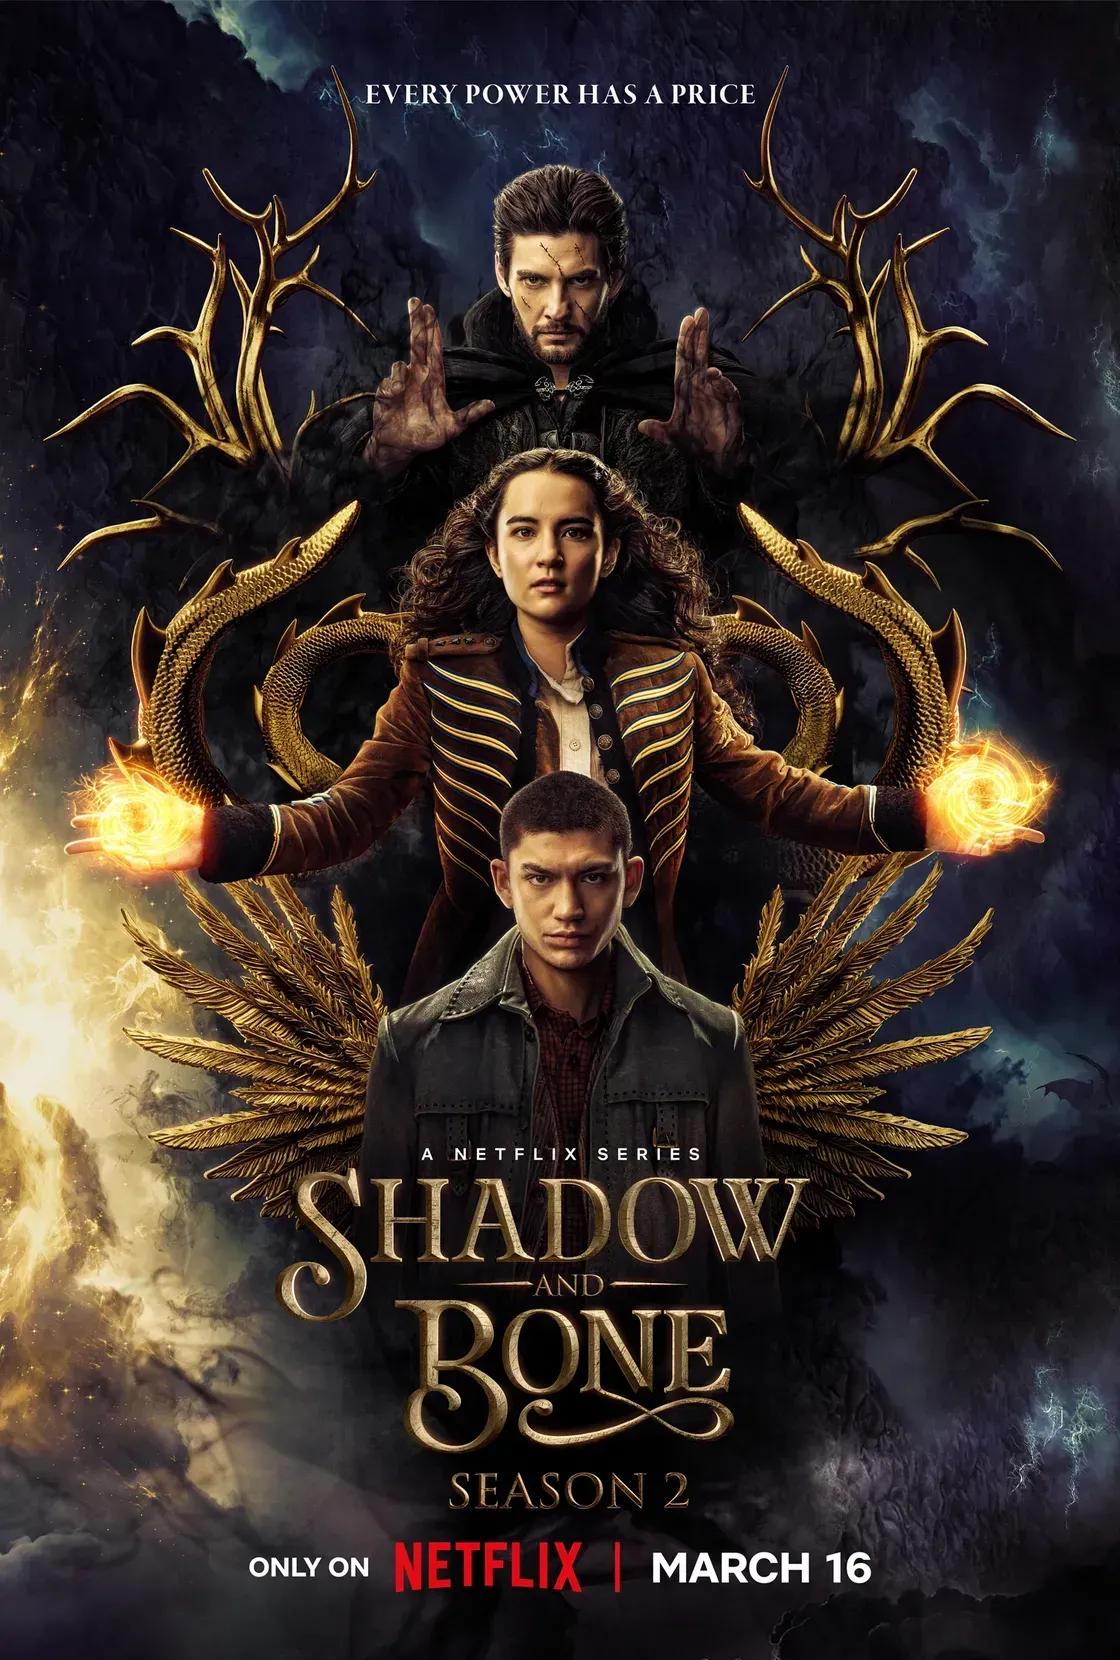 Ravka Netflix fantasy drama 'Shadow and Bone' Season 2 releases official trailer, will start broadcasting on March 16 | FMV6